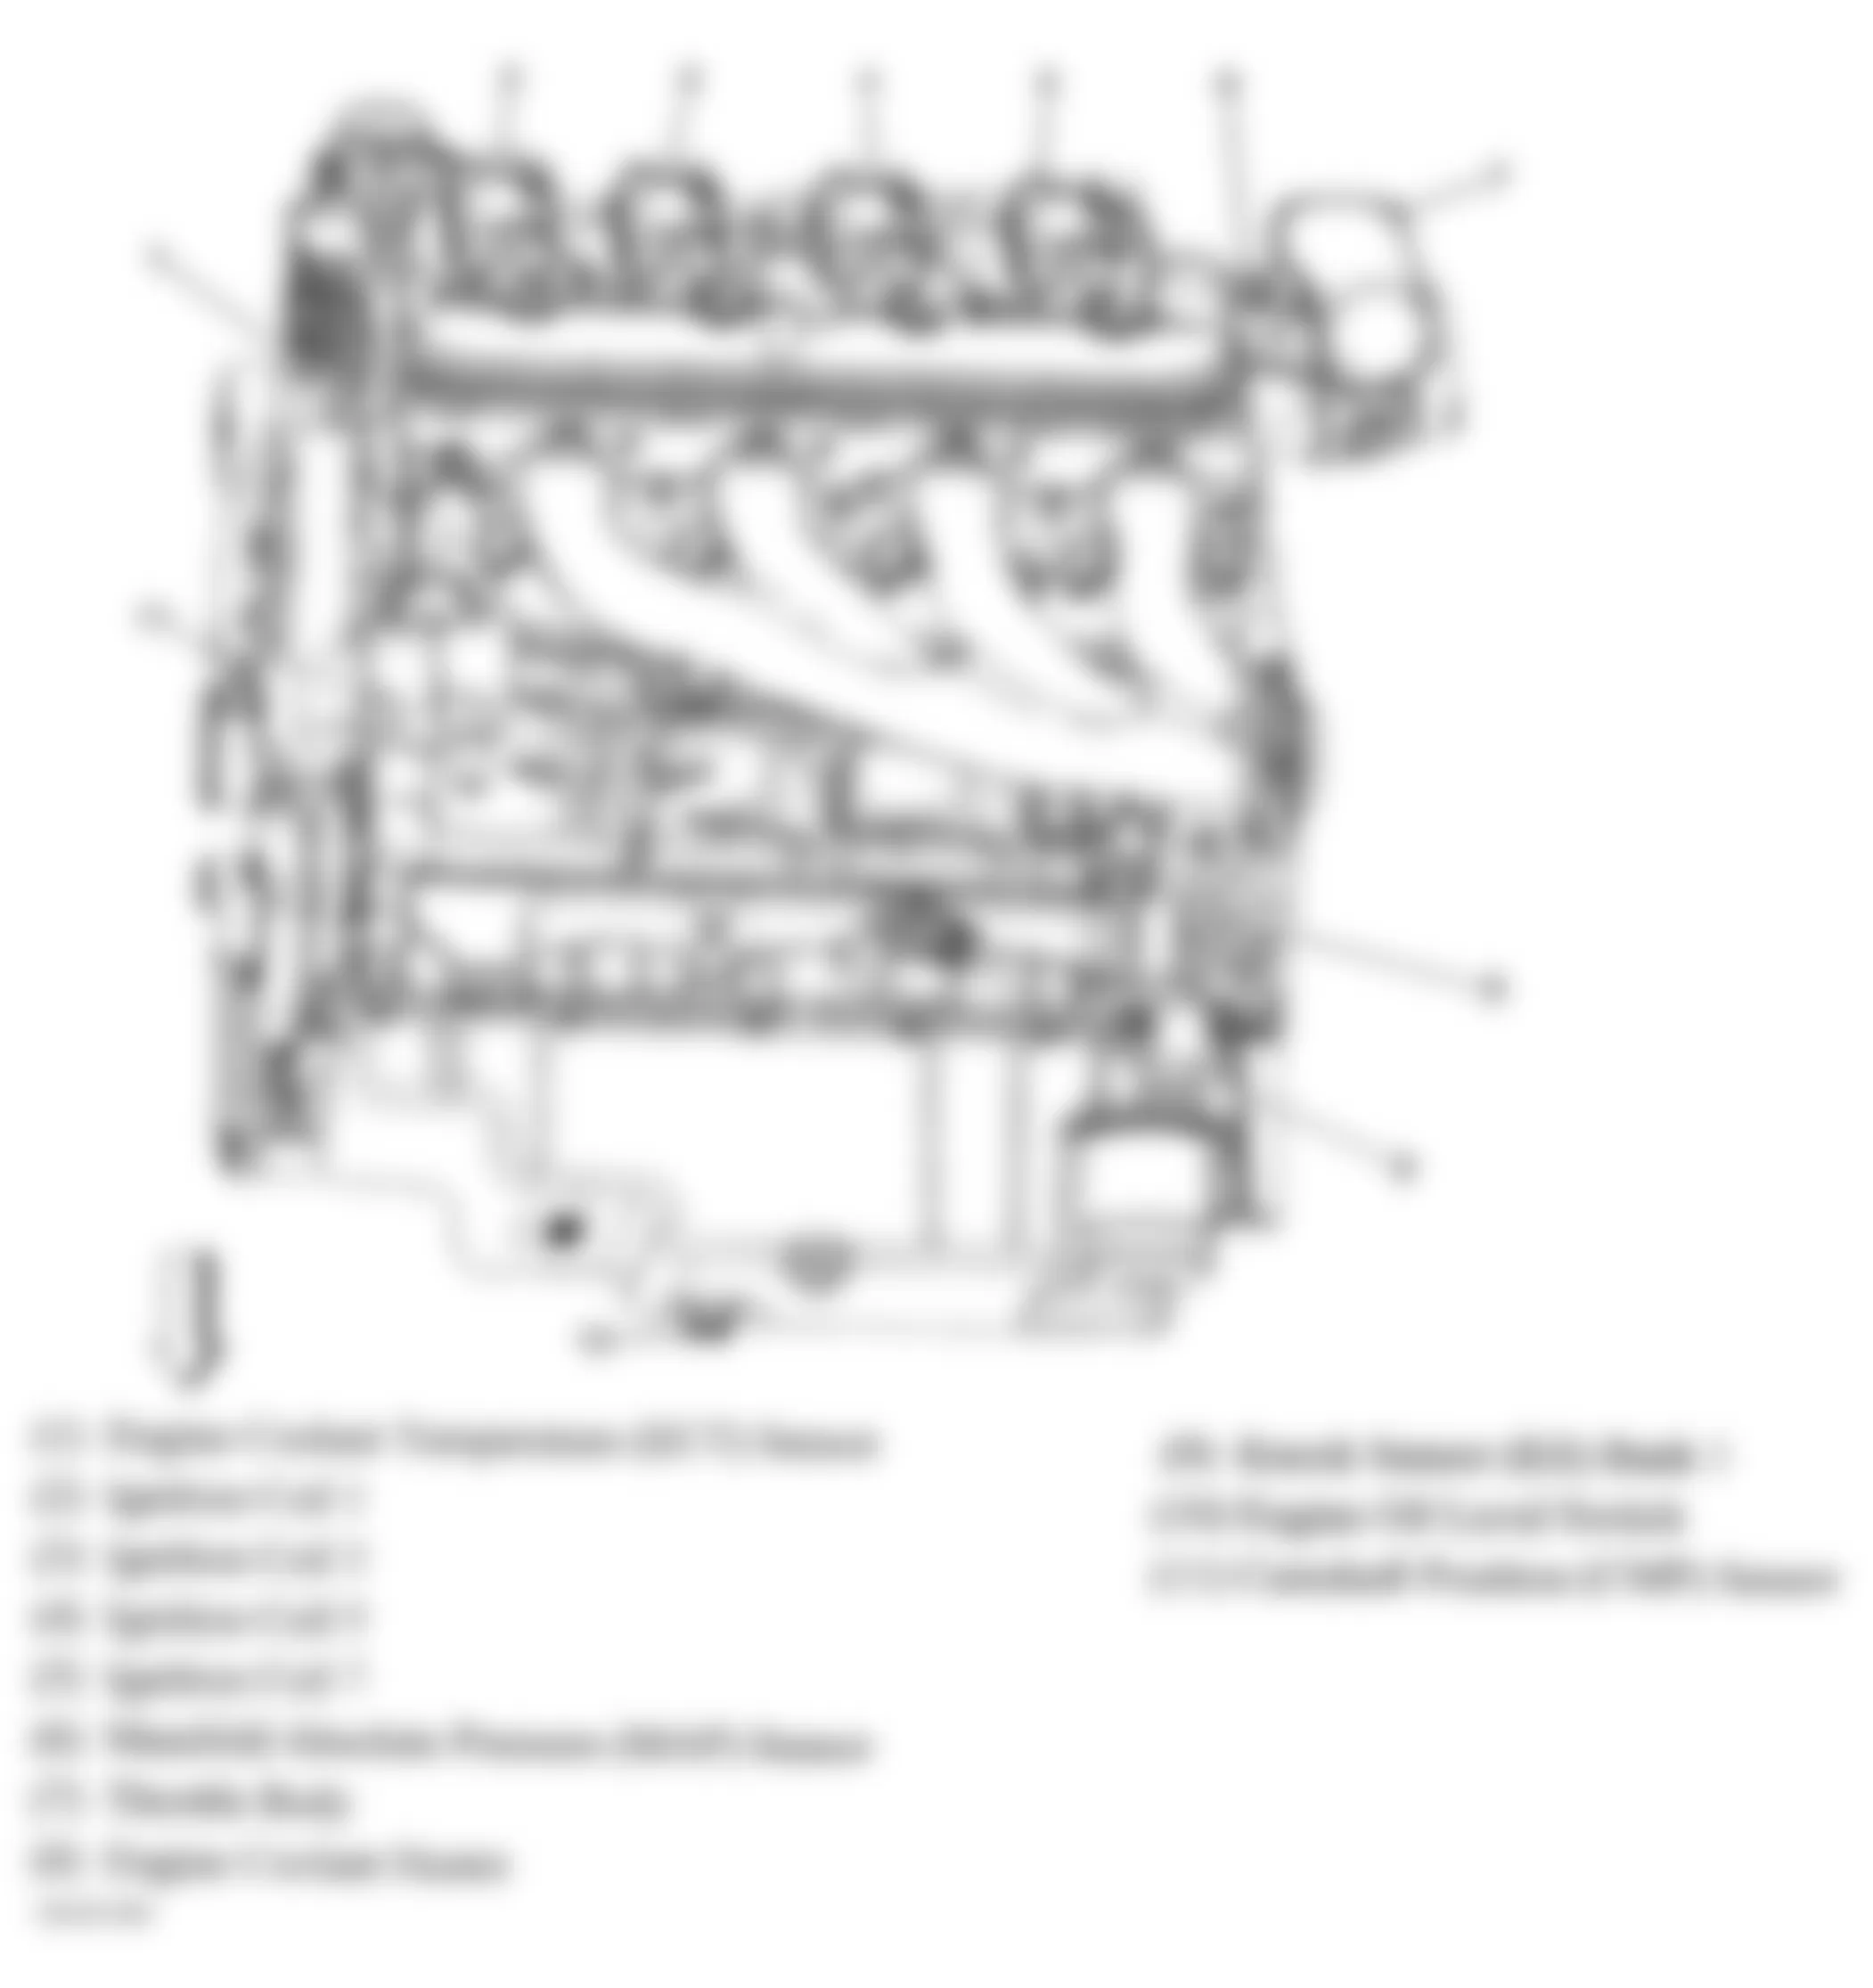 Chevrolet Monte Carlo LT 2006 - Component Locations -  Left Side Of Engine (5.3L)